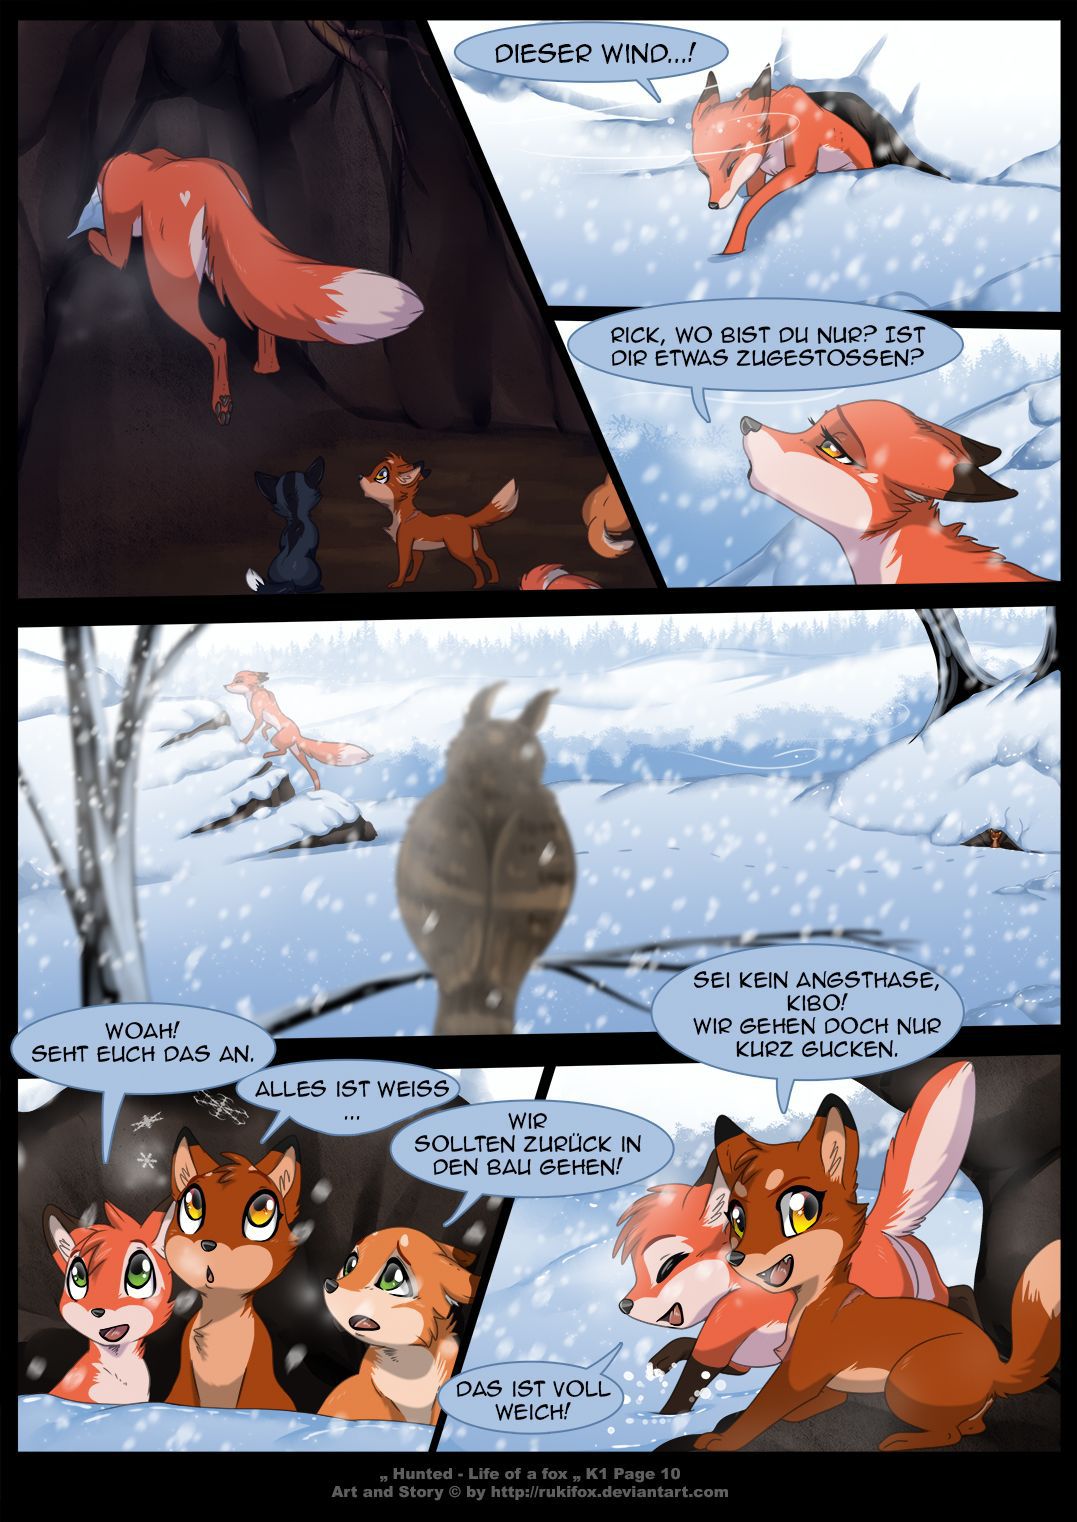 [RukiFox] Hunted -Life of a Fox - Chapter 1 [On Going]{German} 12